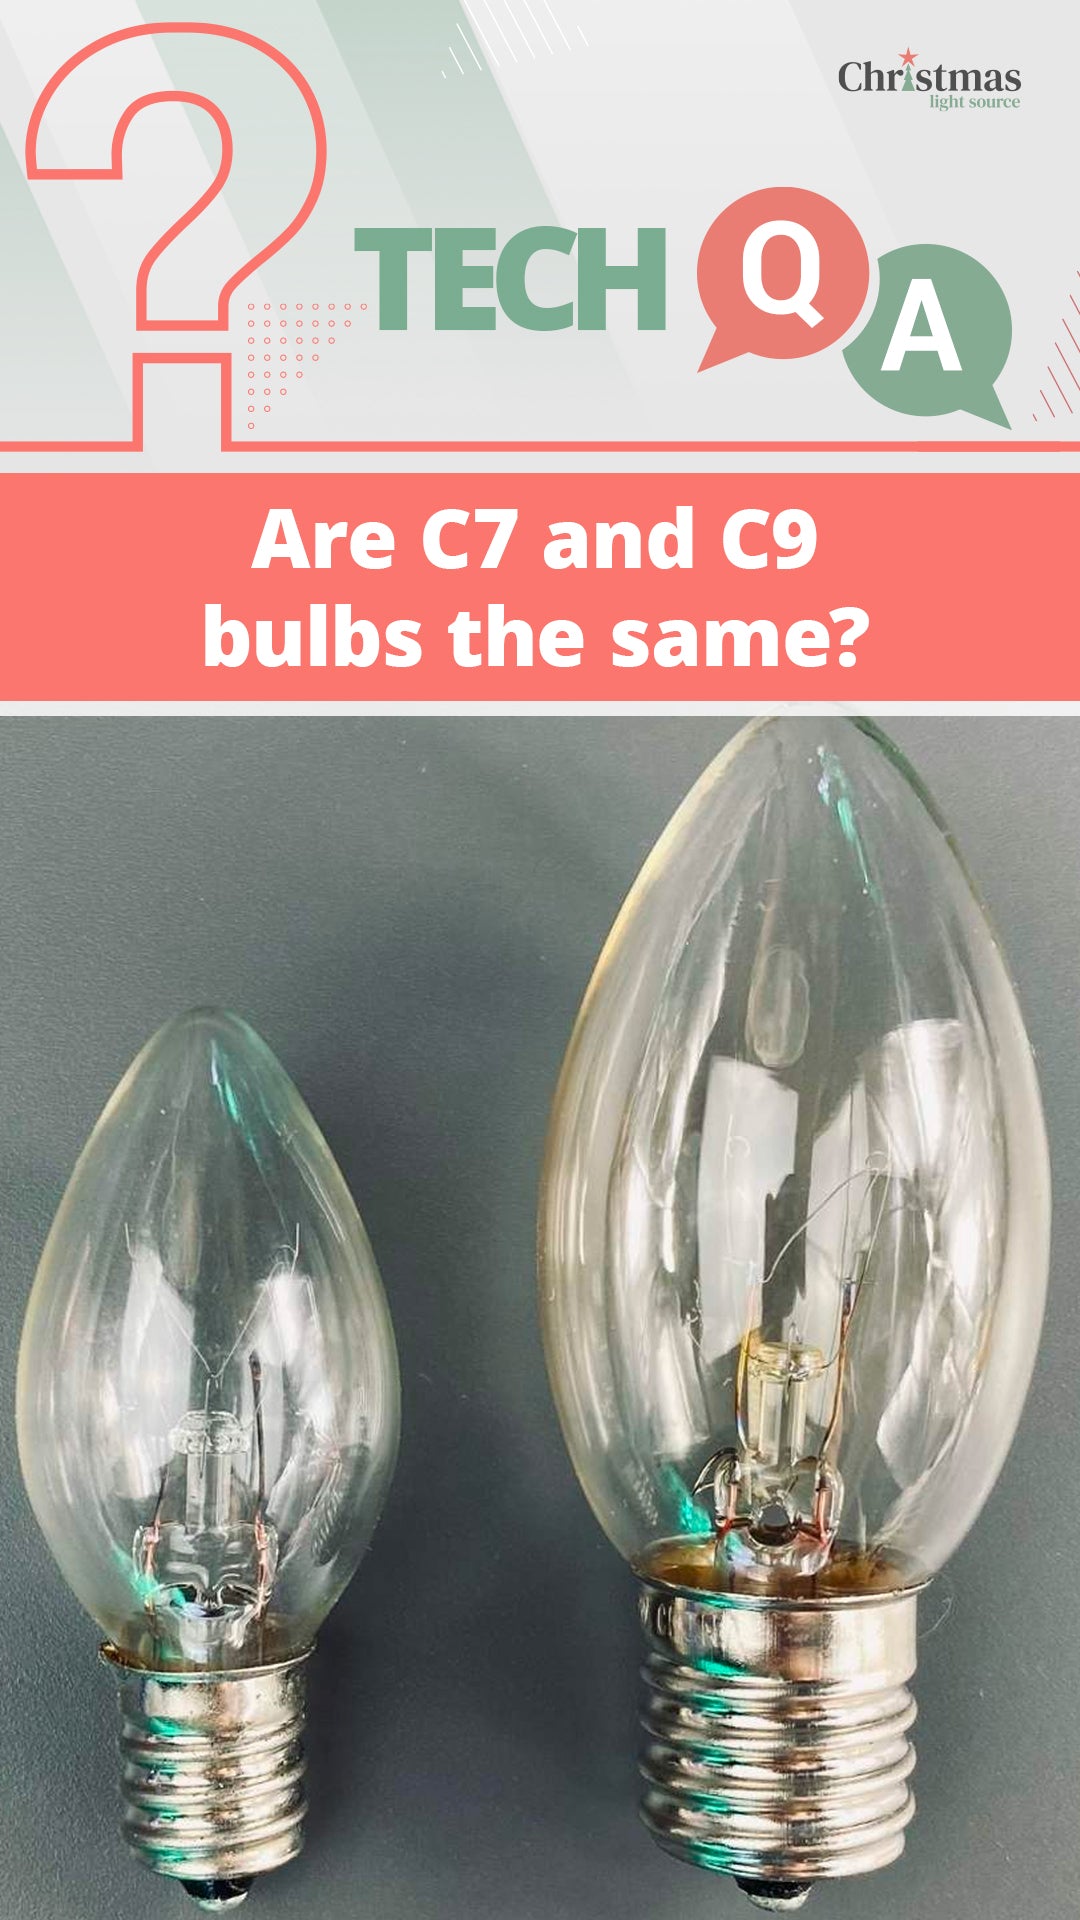 Are C7 and C9 bulbs the same?